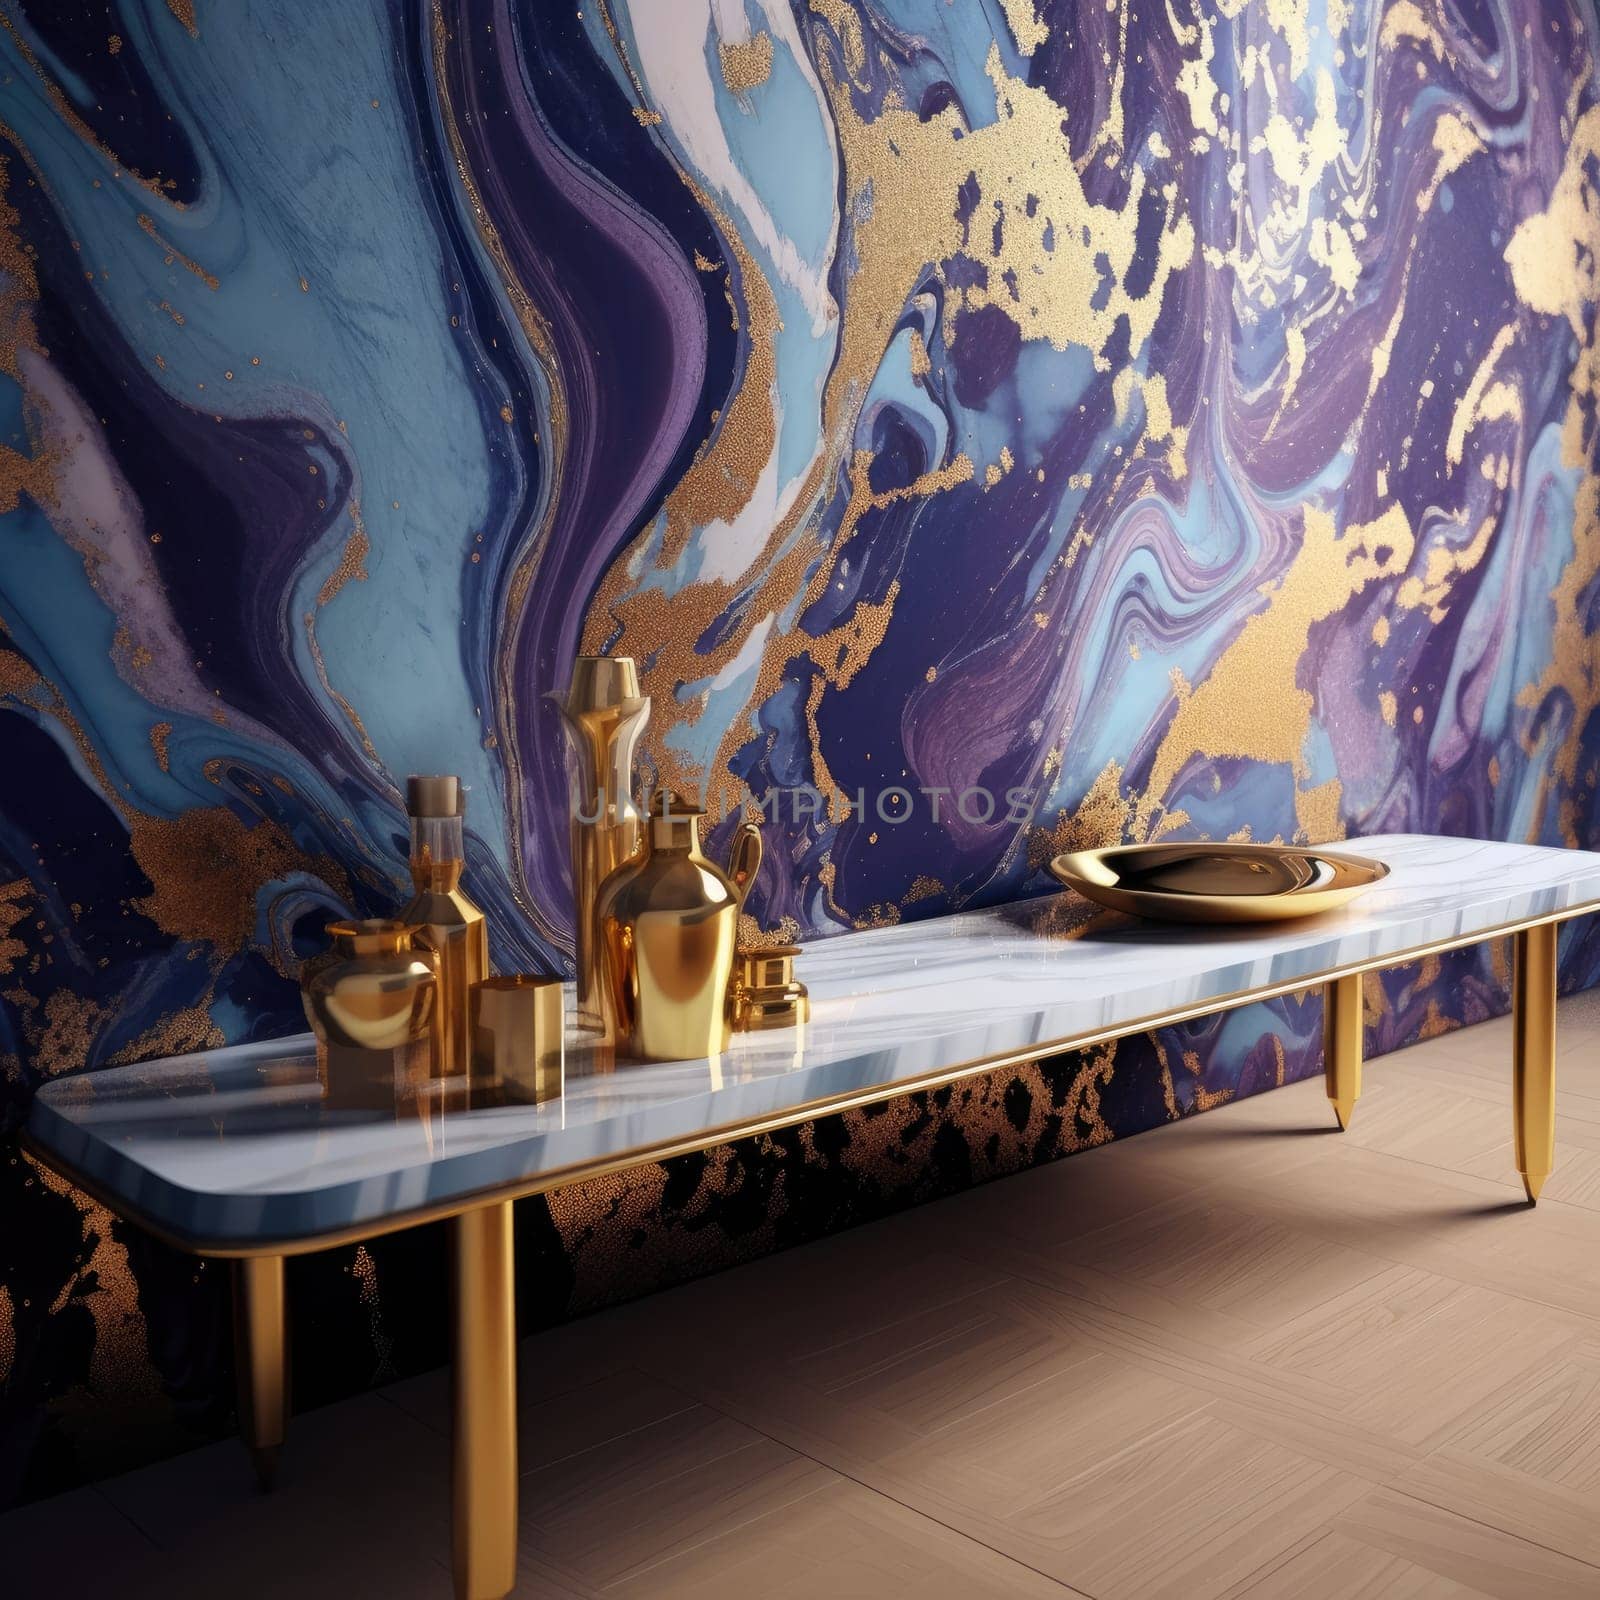 Table on the background of wallpaper with a marble pattern by cherezoff